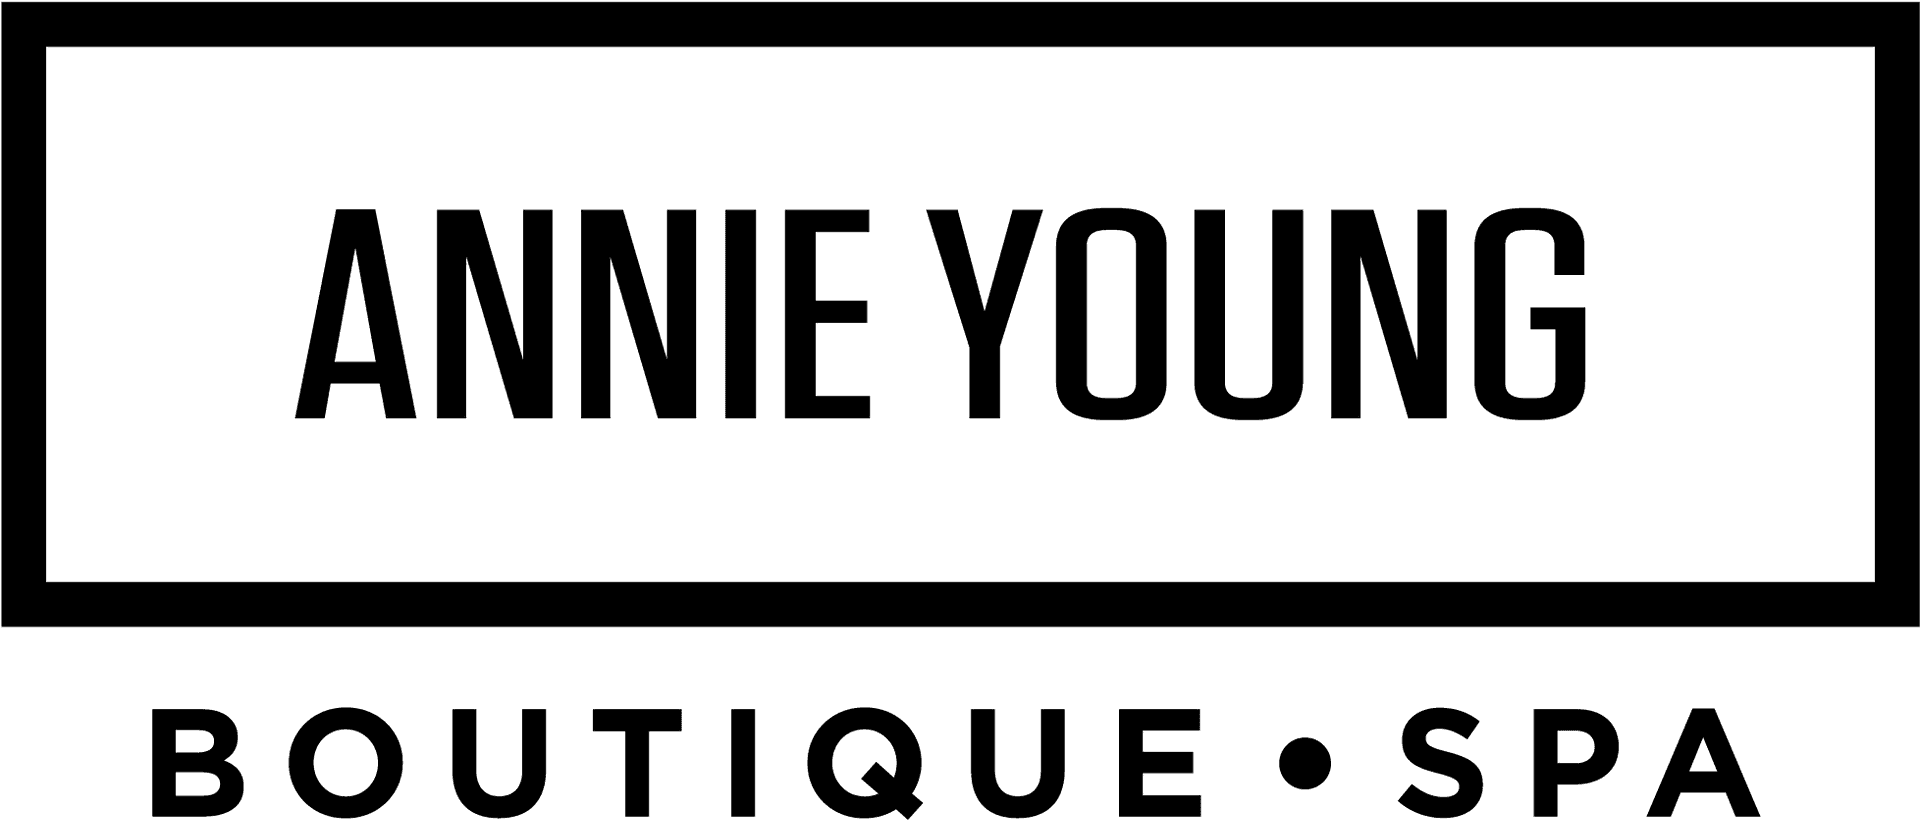 Annie Young Boutique Spa Logo PNG